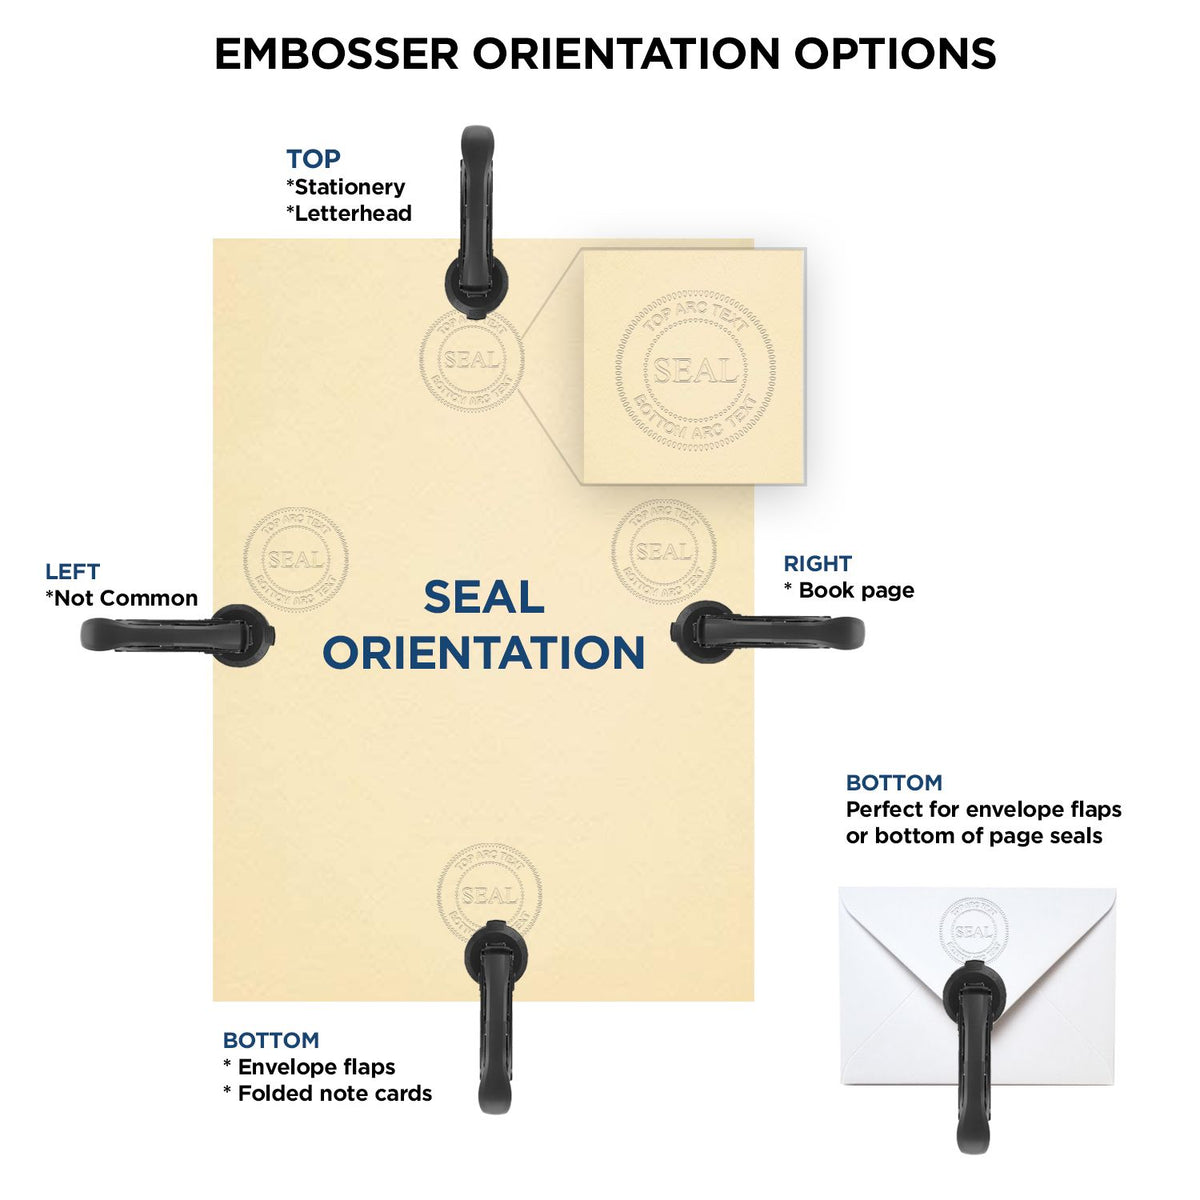 An infographic for the Georgia Desk Architect Embossing Seal showing embosser orientation, this is showing examples of a top, bottom, right and left insert.